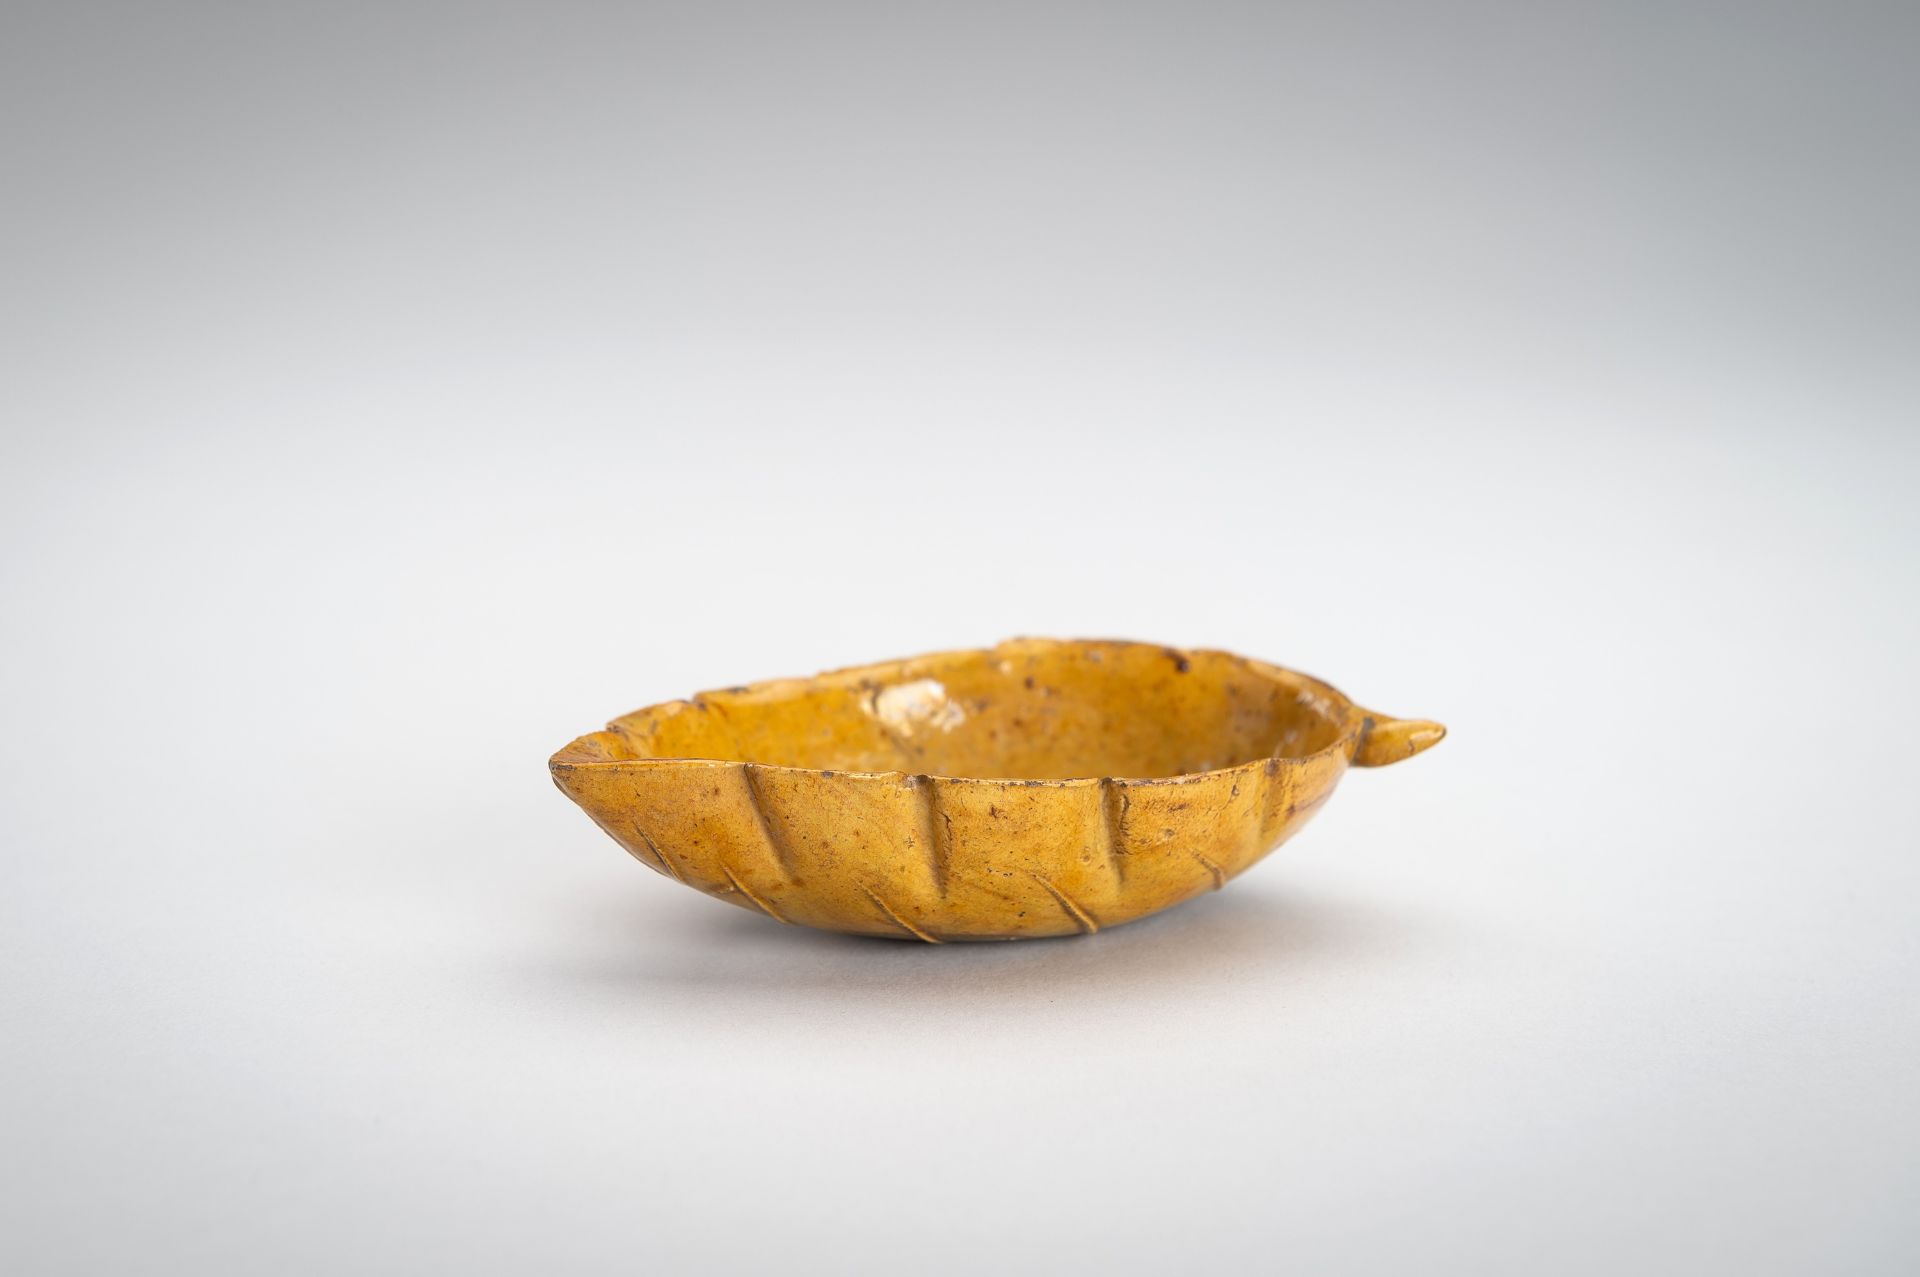 A GROUP OF FOUR SMALL GLAZED CERAMIC ITEMS - Image 2 of 16